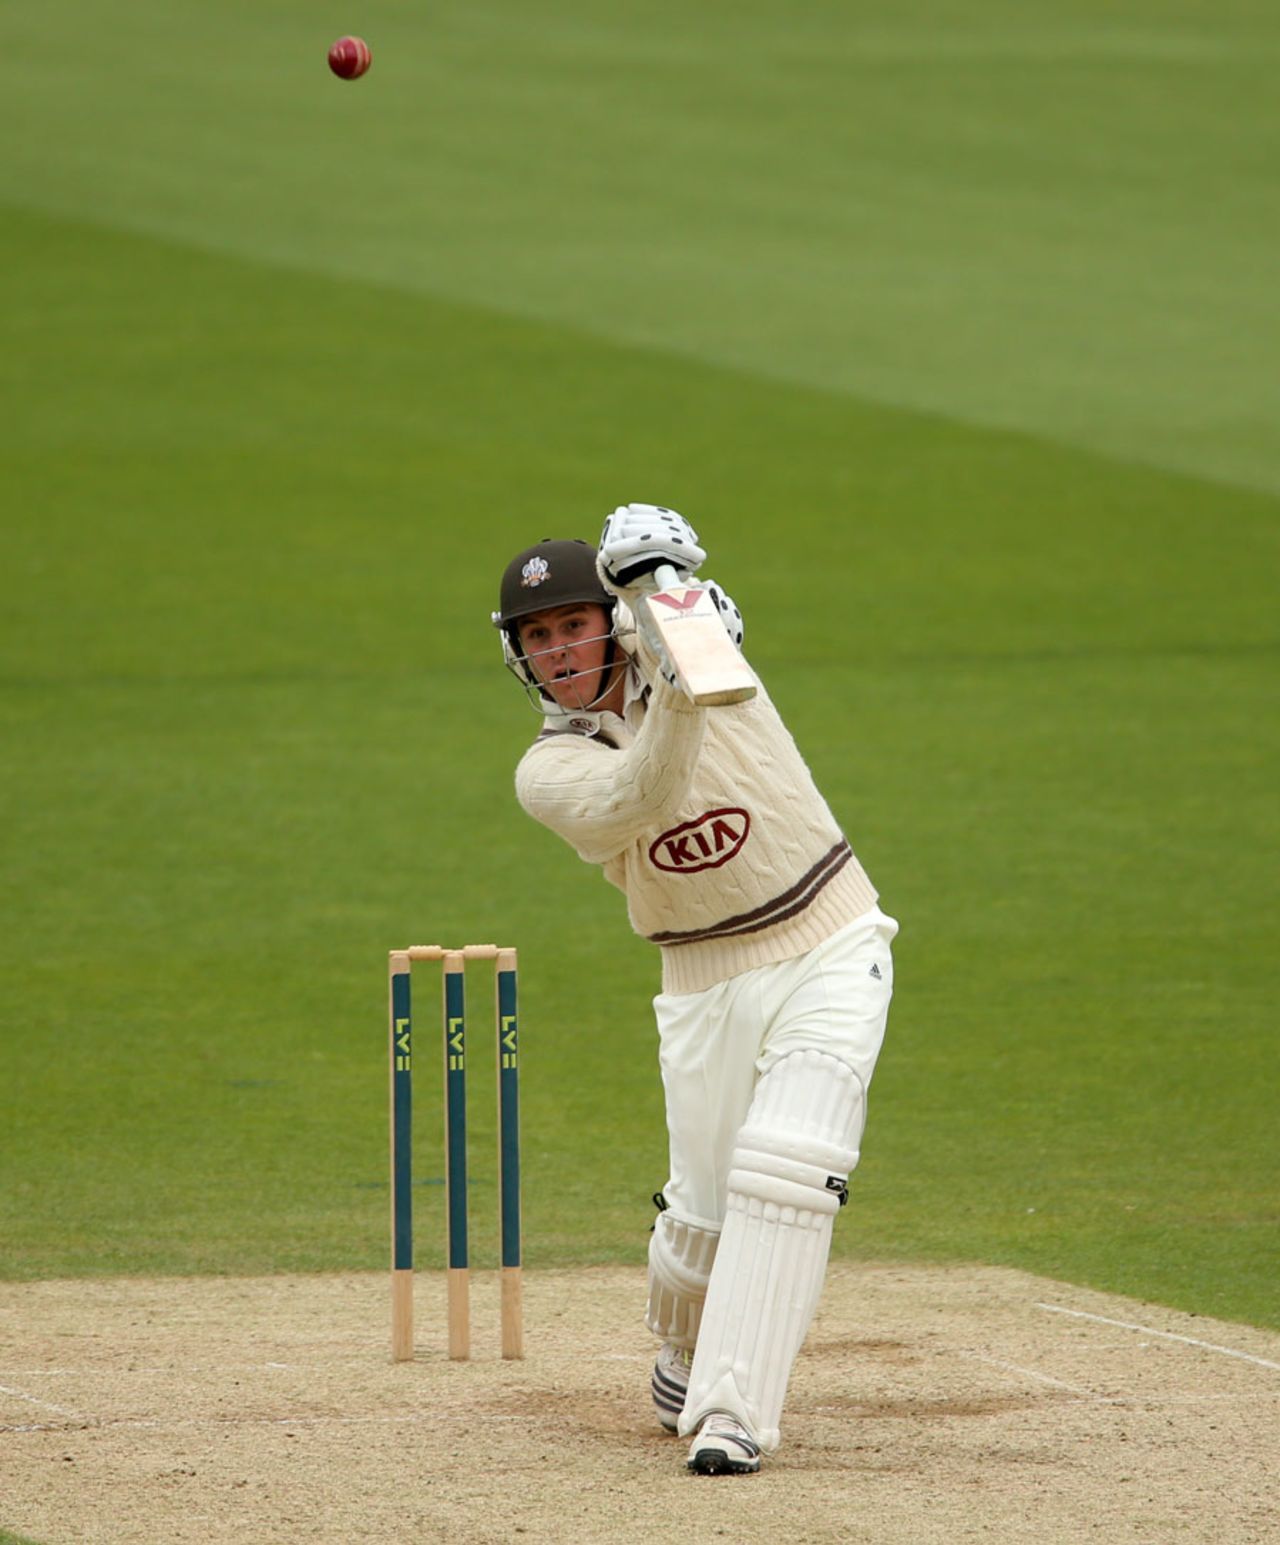 Jason Roy became Callum Thorp's second victim, Surrey v Durham, County Championship, Division One, The Oval, 1st day, May 10, 2012